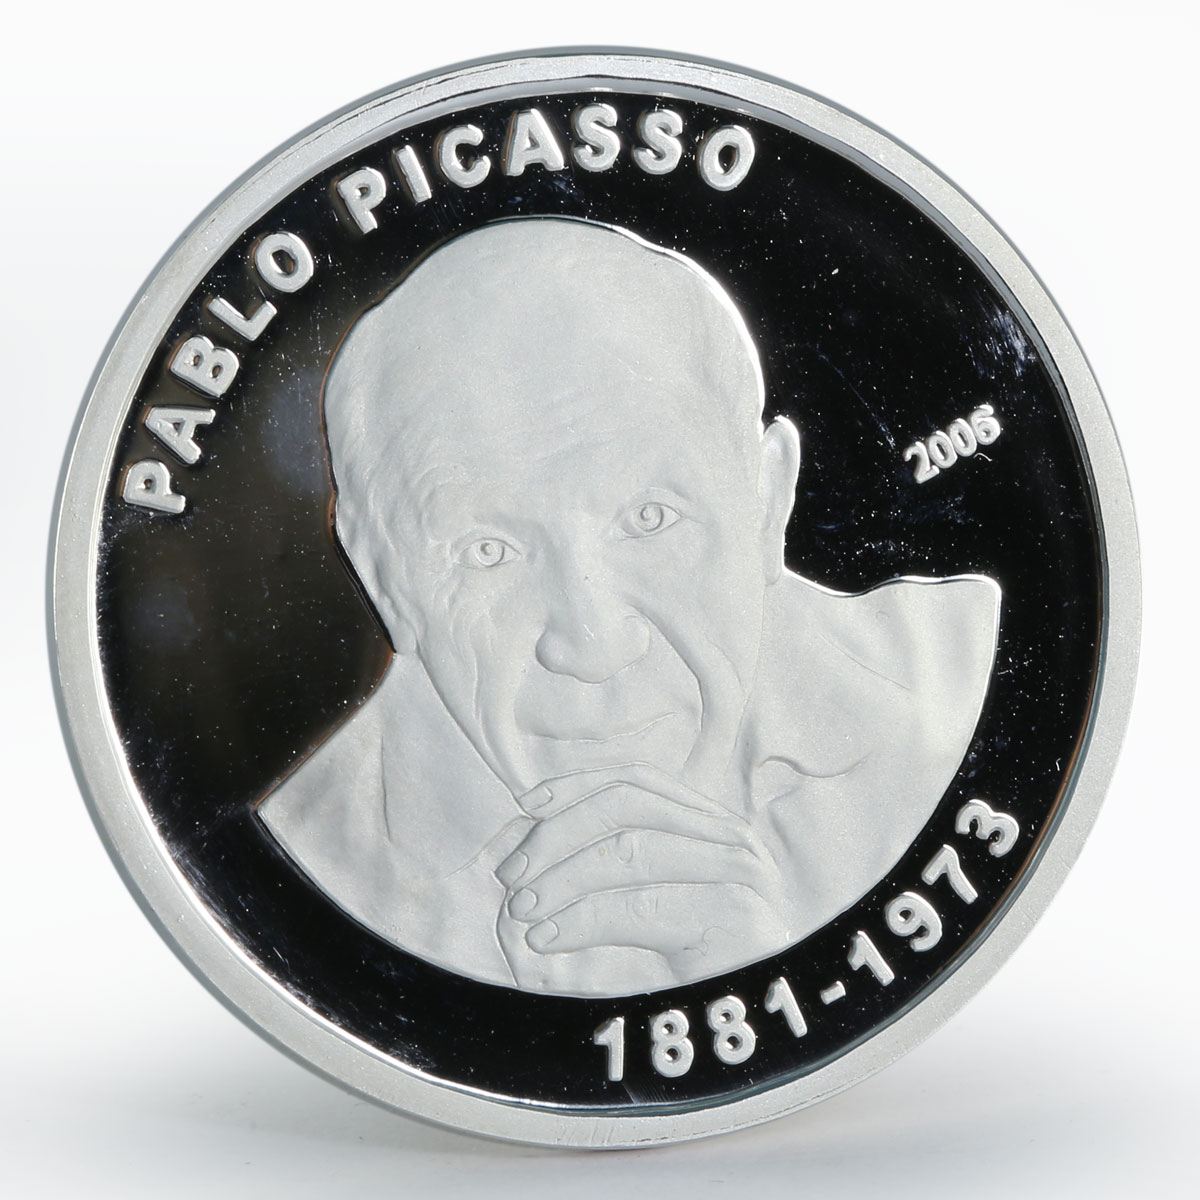 Ivory Coast 1000 francs Pablo Picasso painter sculptor proof silver coin 2006